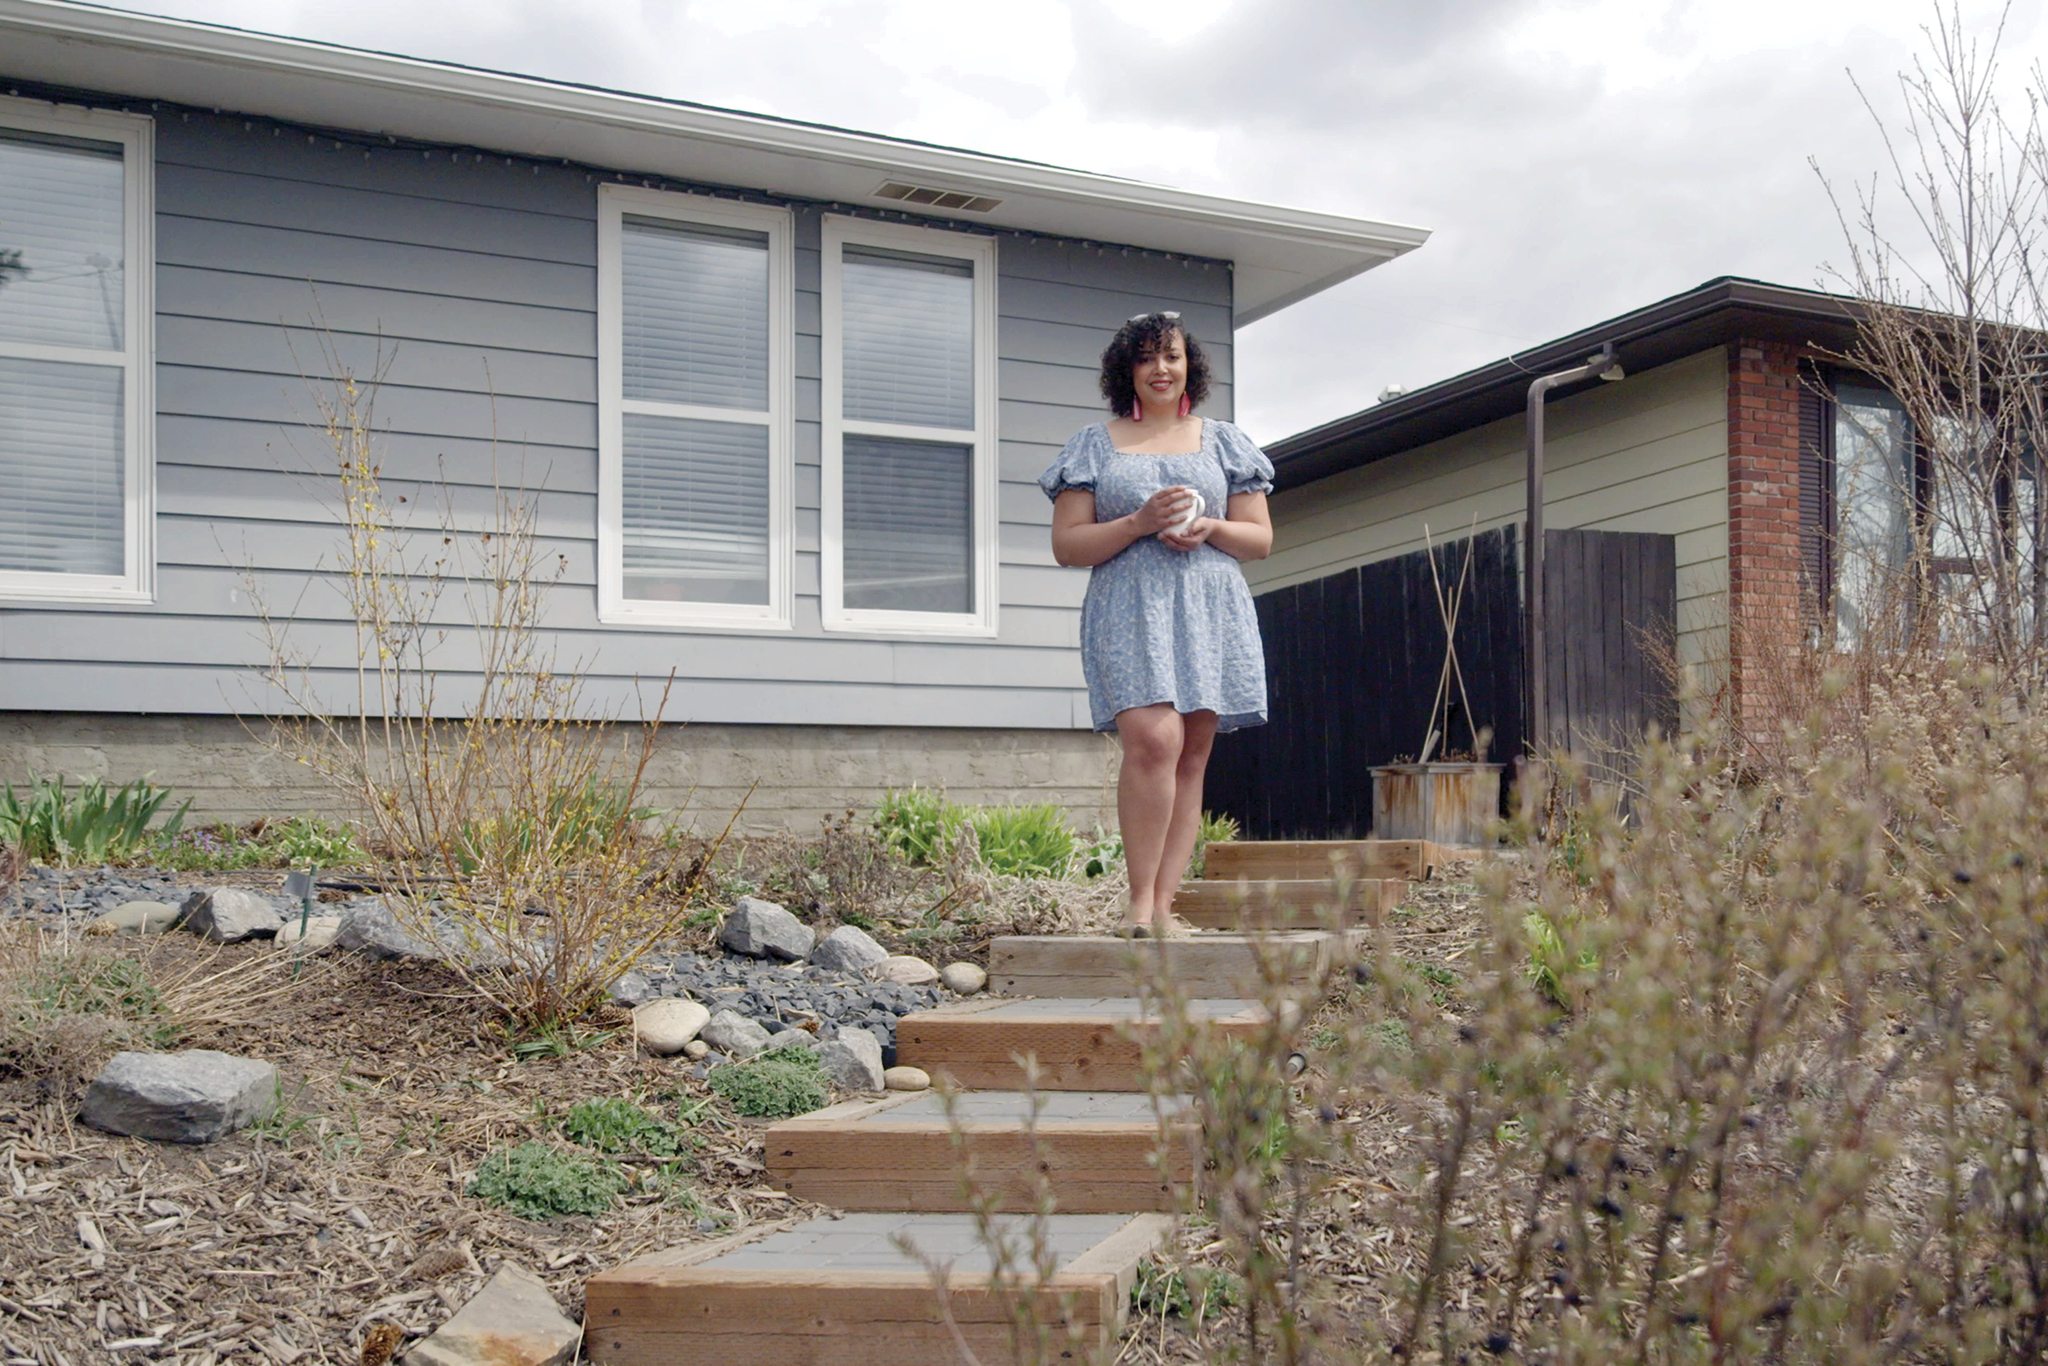 Heather stands on a hill in front of her house wearing a blue dress.